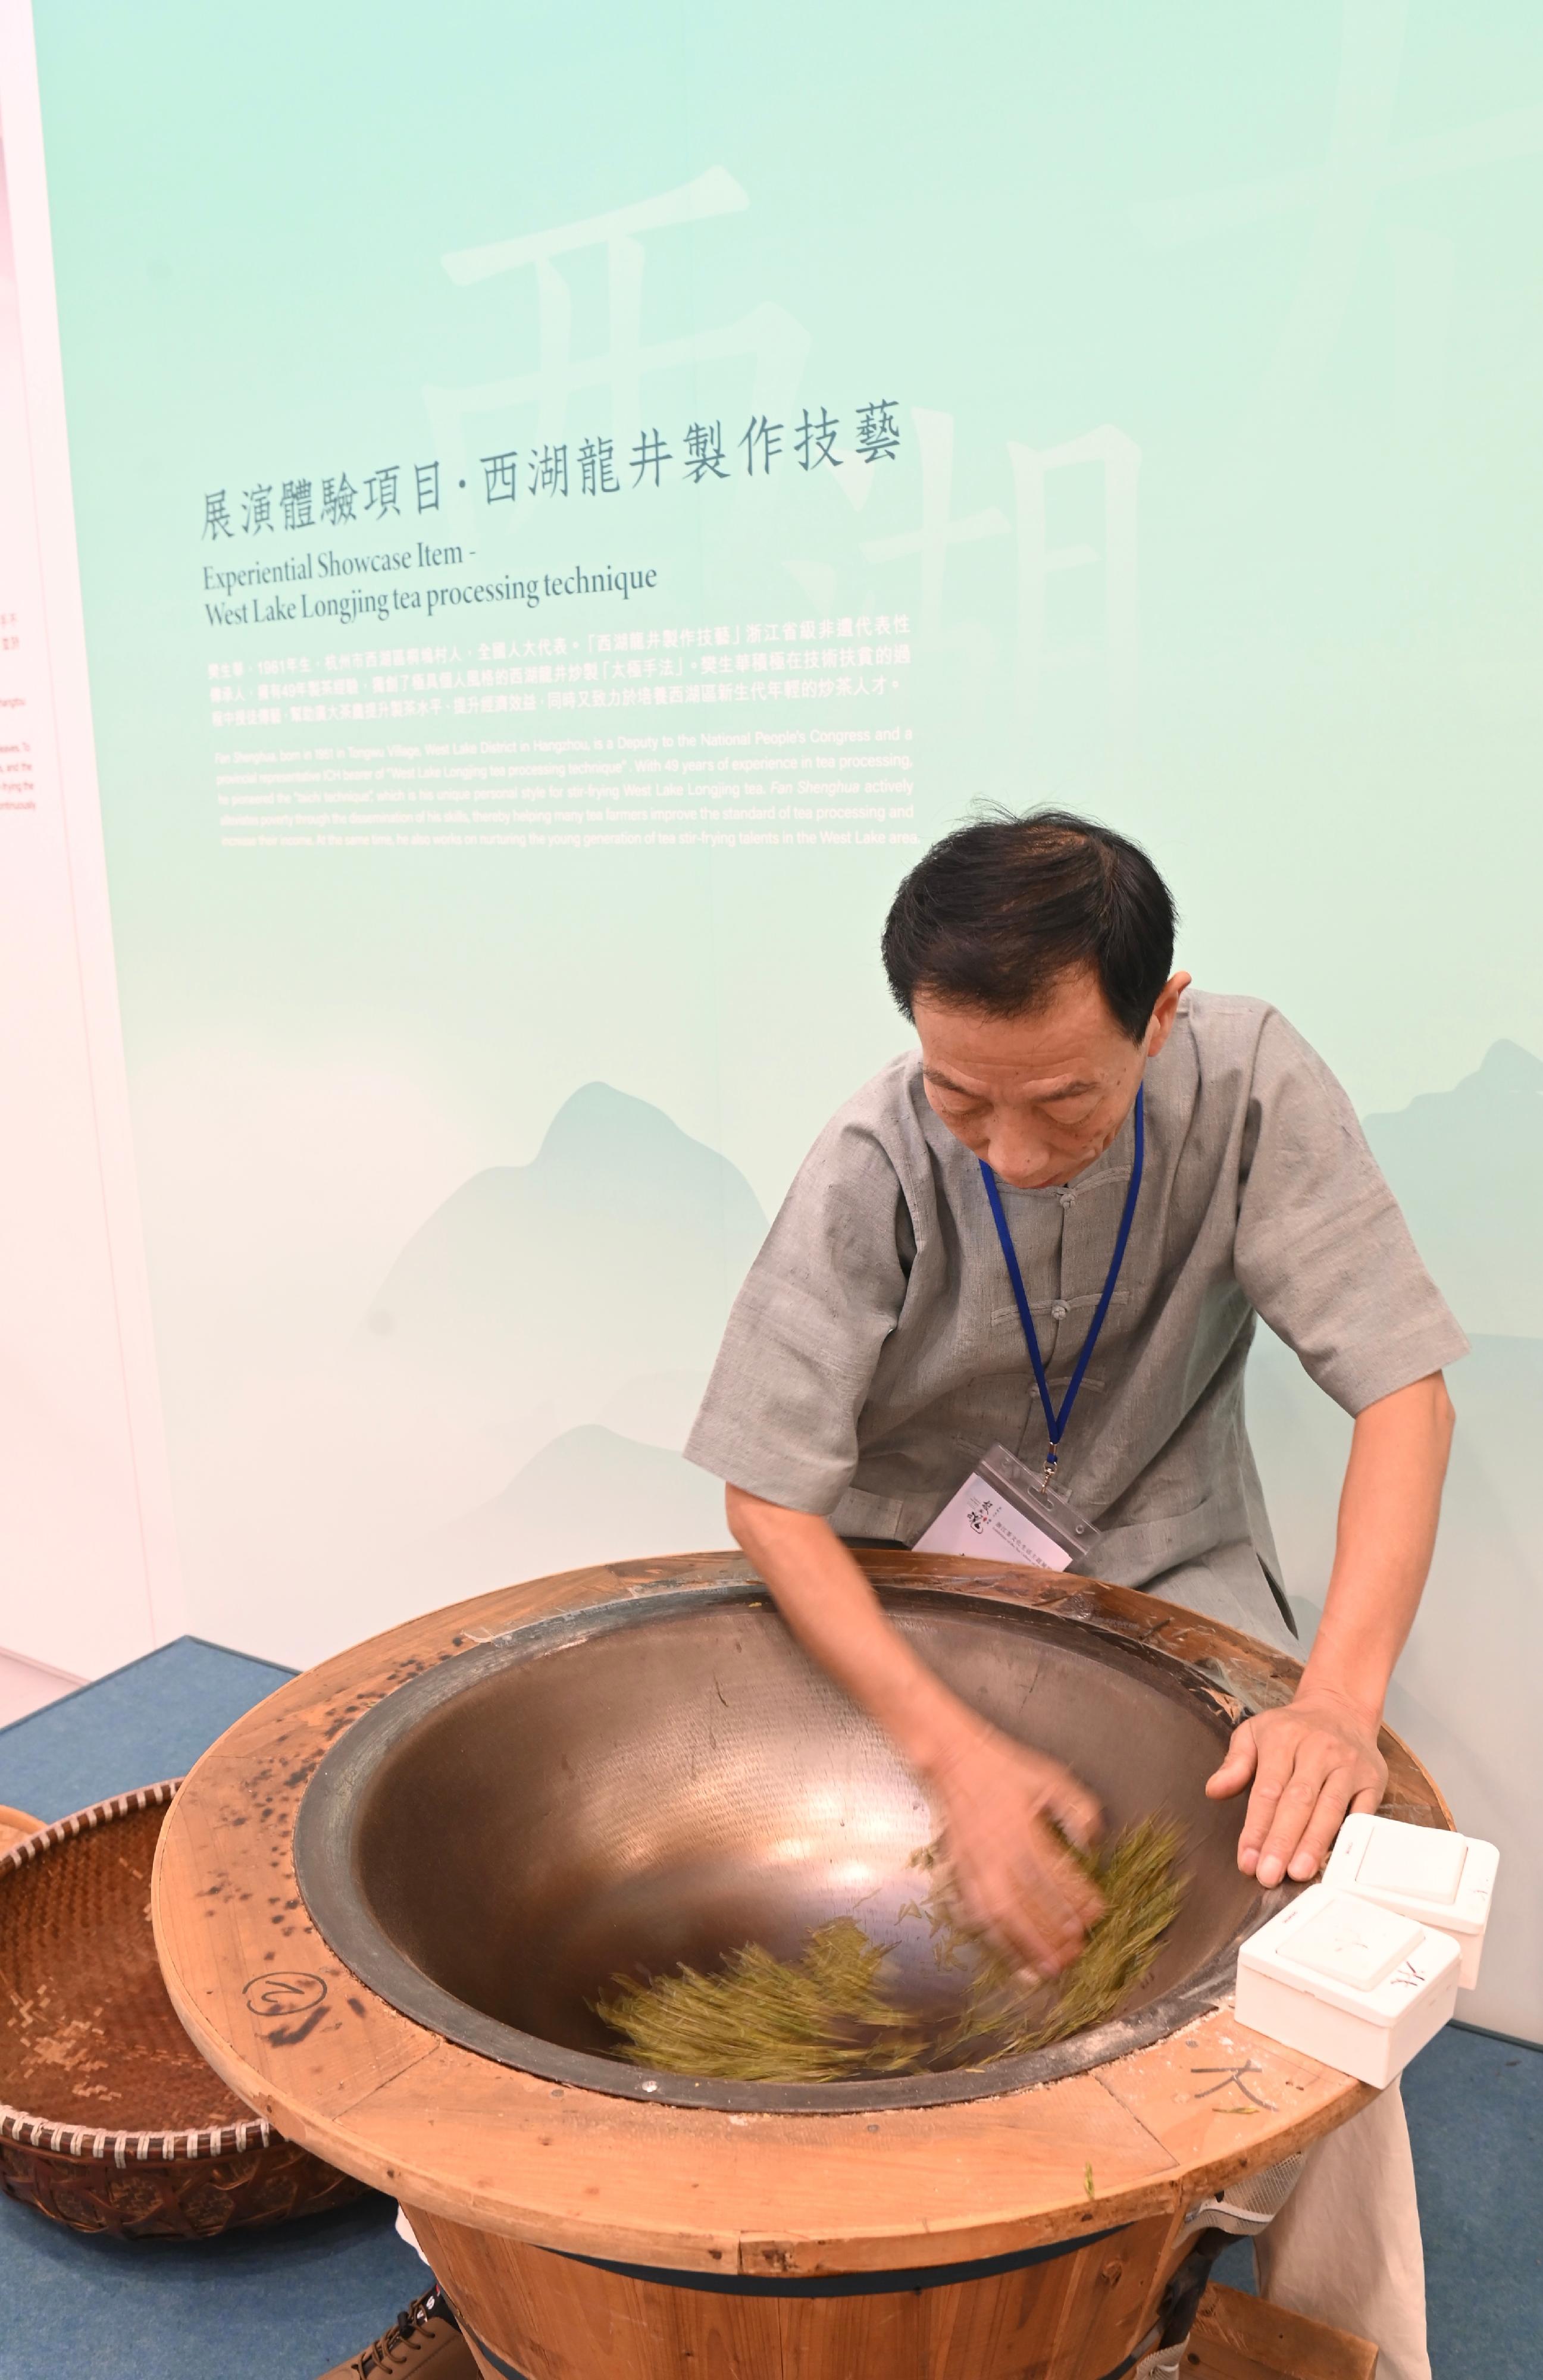 The opening ceremony for the "Genesis and Spirit - Tea for Harmony · Yaji Cultural Salon: Exhibition of the Tea Culture of Zhejiang" was held today (August 4) at the Hong Kong Central Library. Photo shows the demonstration of world intangible cultural heritage item, West Lake Longjing tea processing technique.